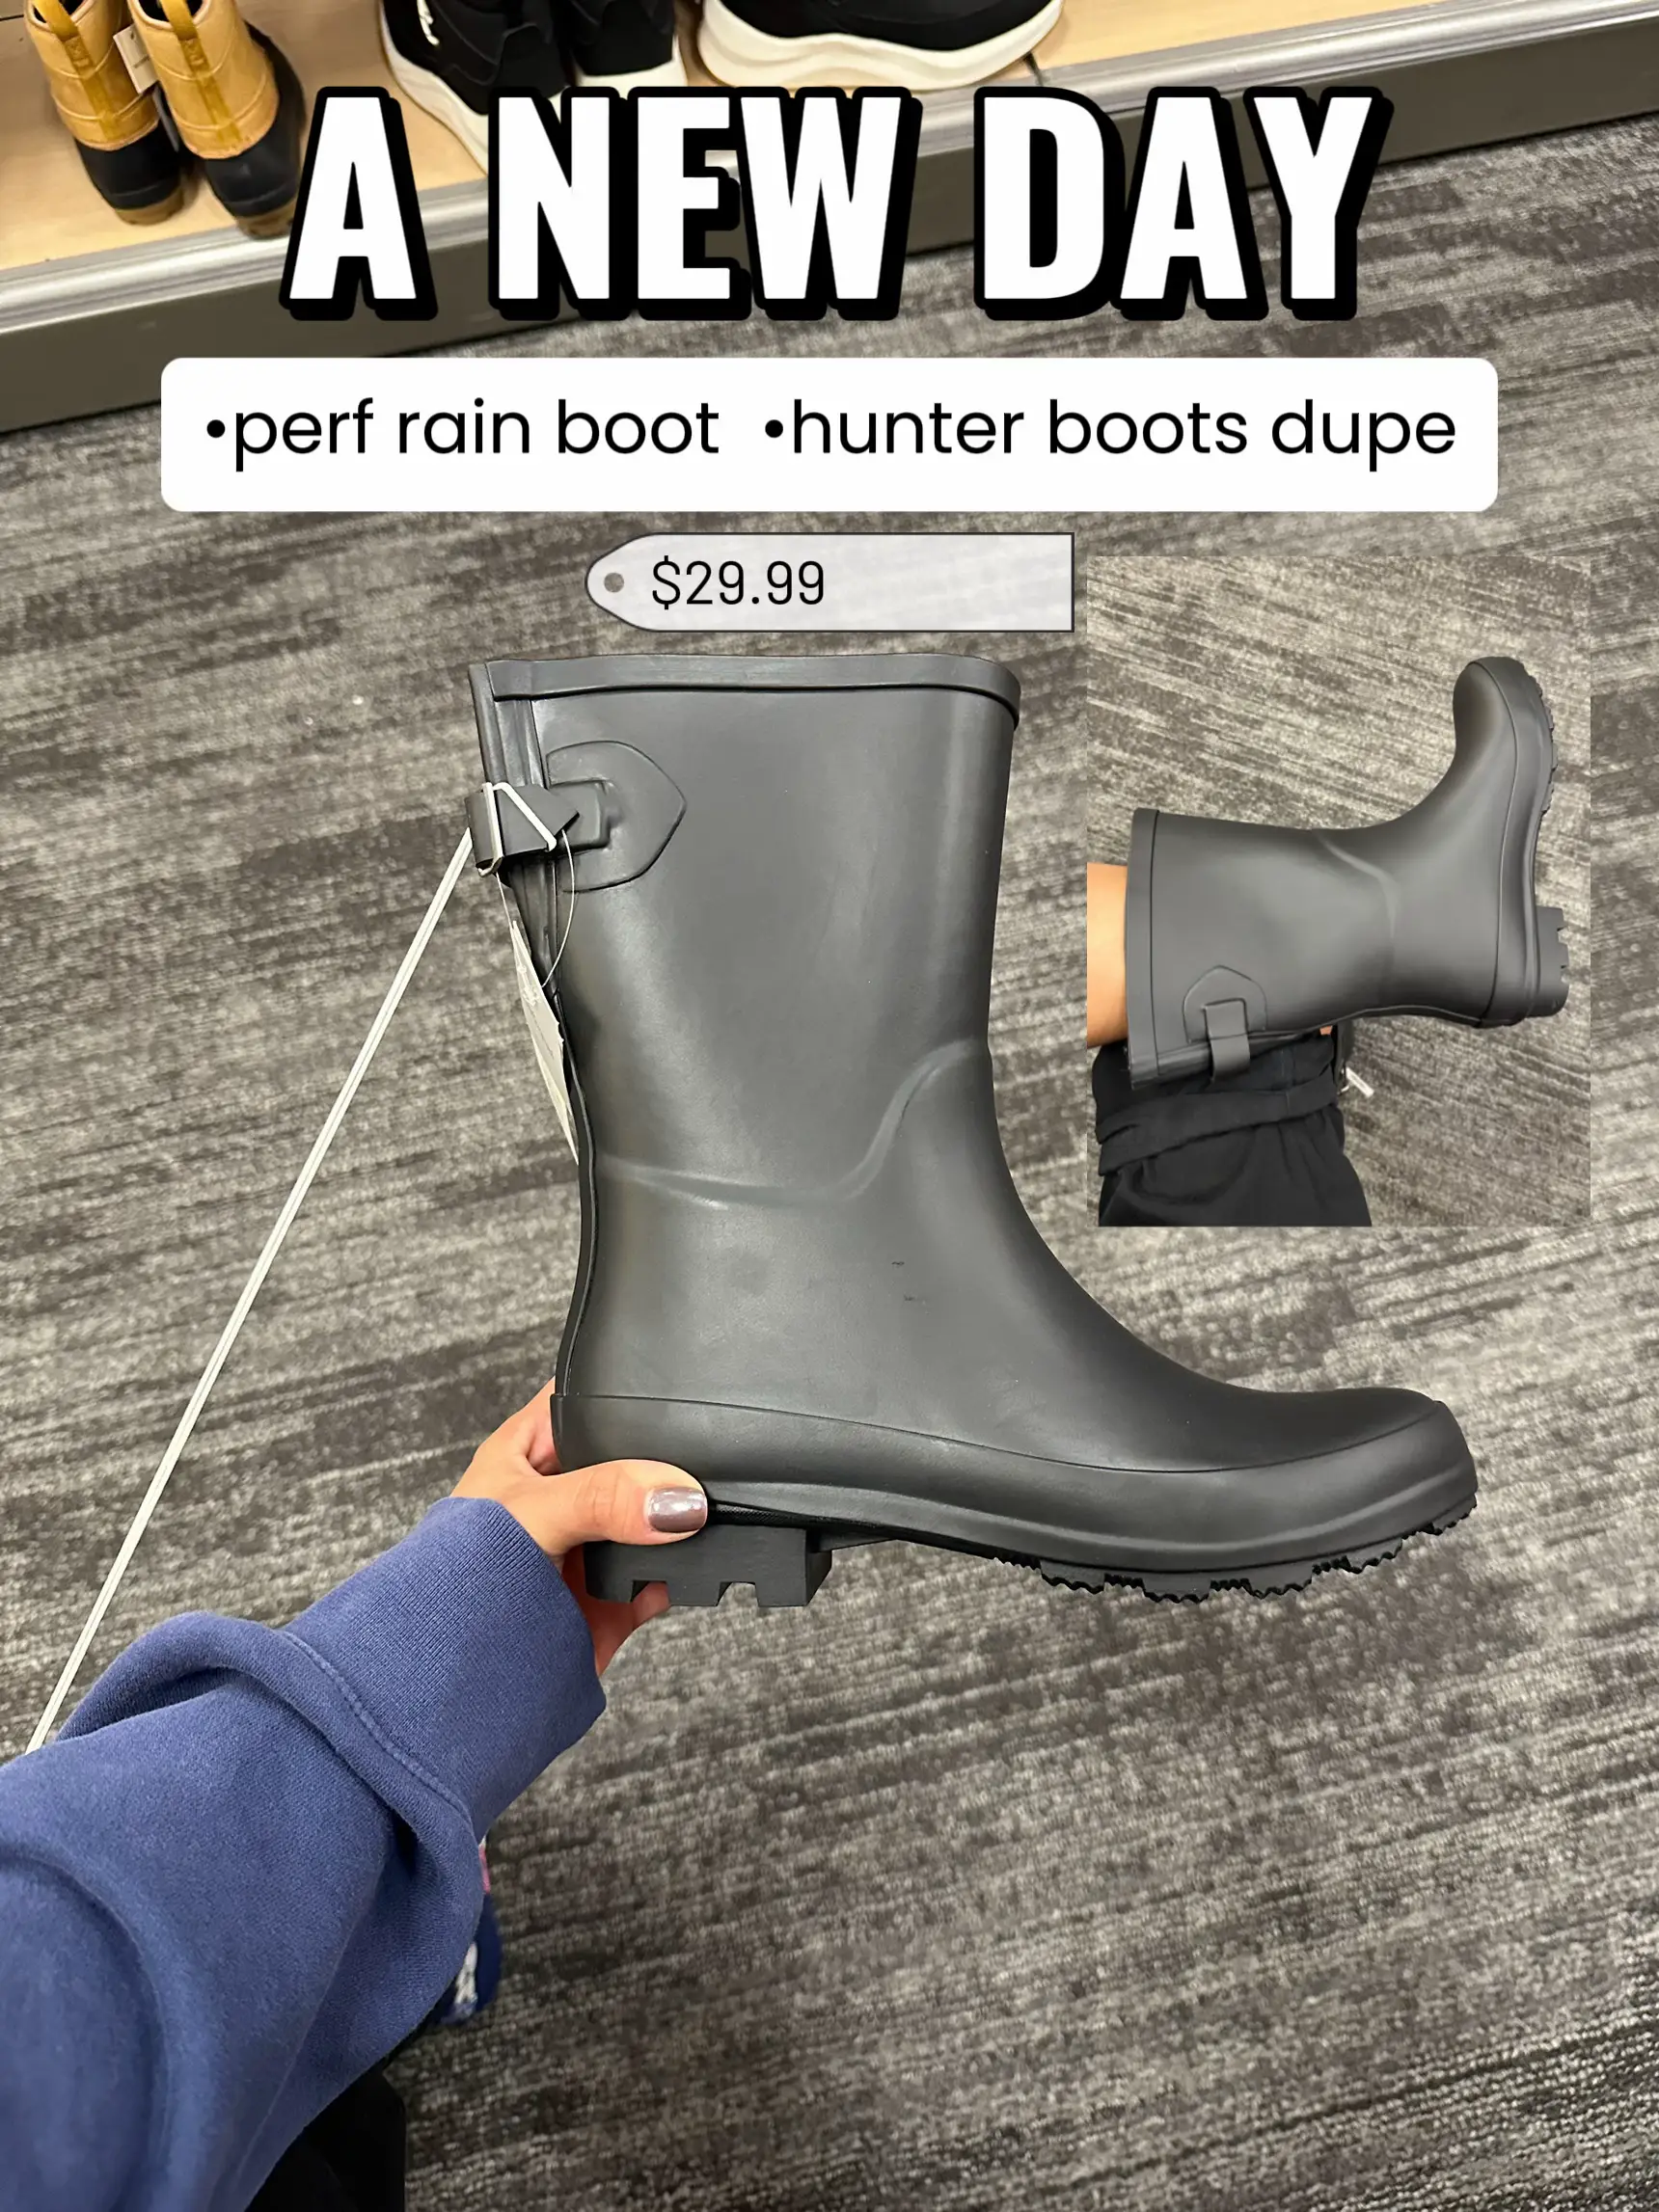  A person is holding a black boot with a price of $29.99.